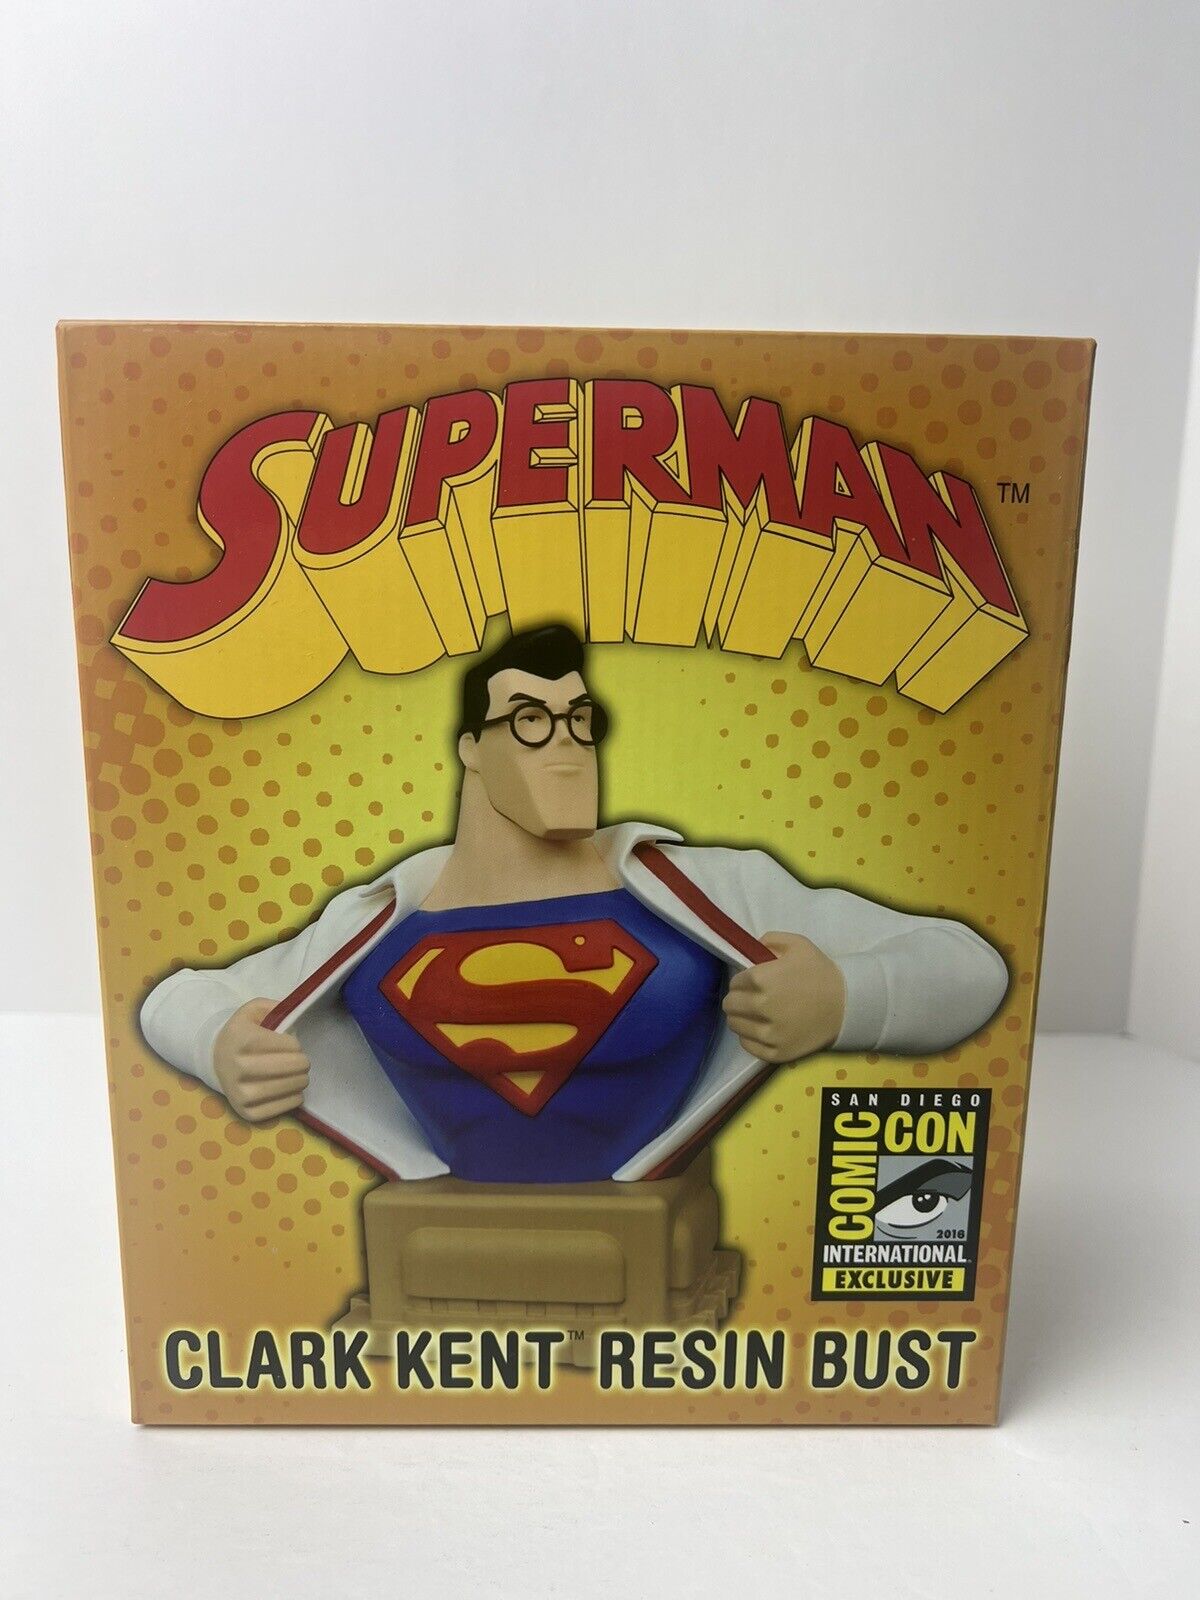 Diamond Select Superman Clark Kent Resin Bust 741 of 1600 Limited Edition (New)